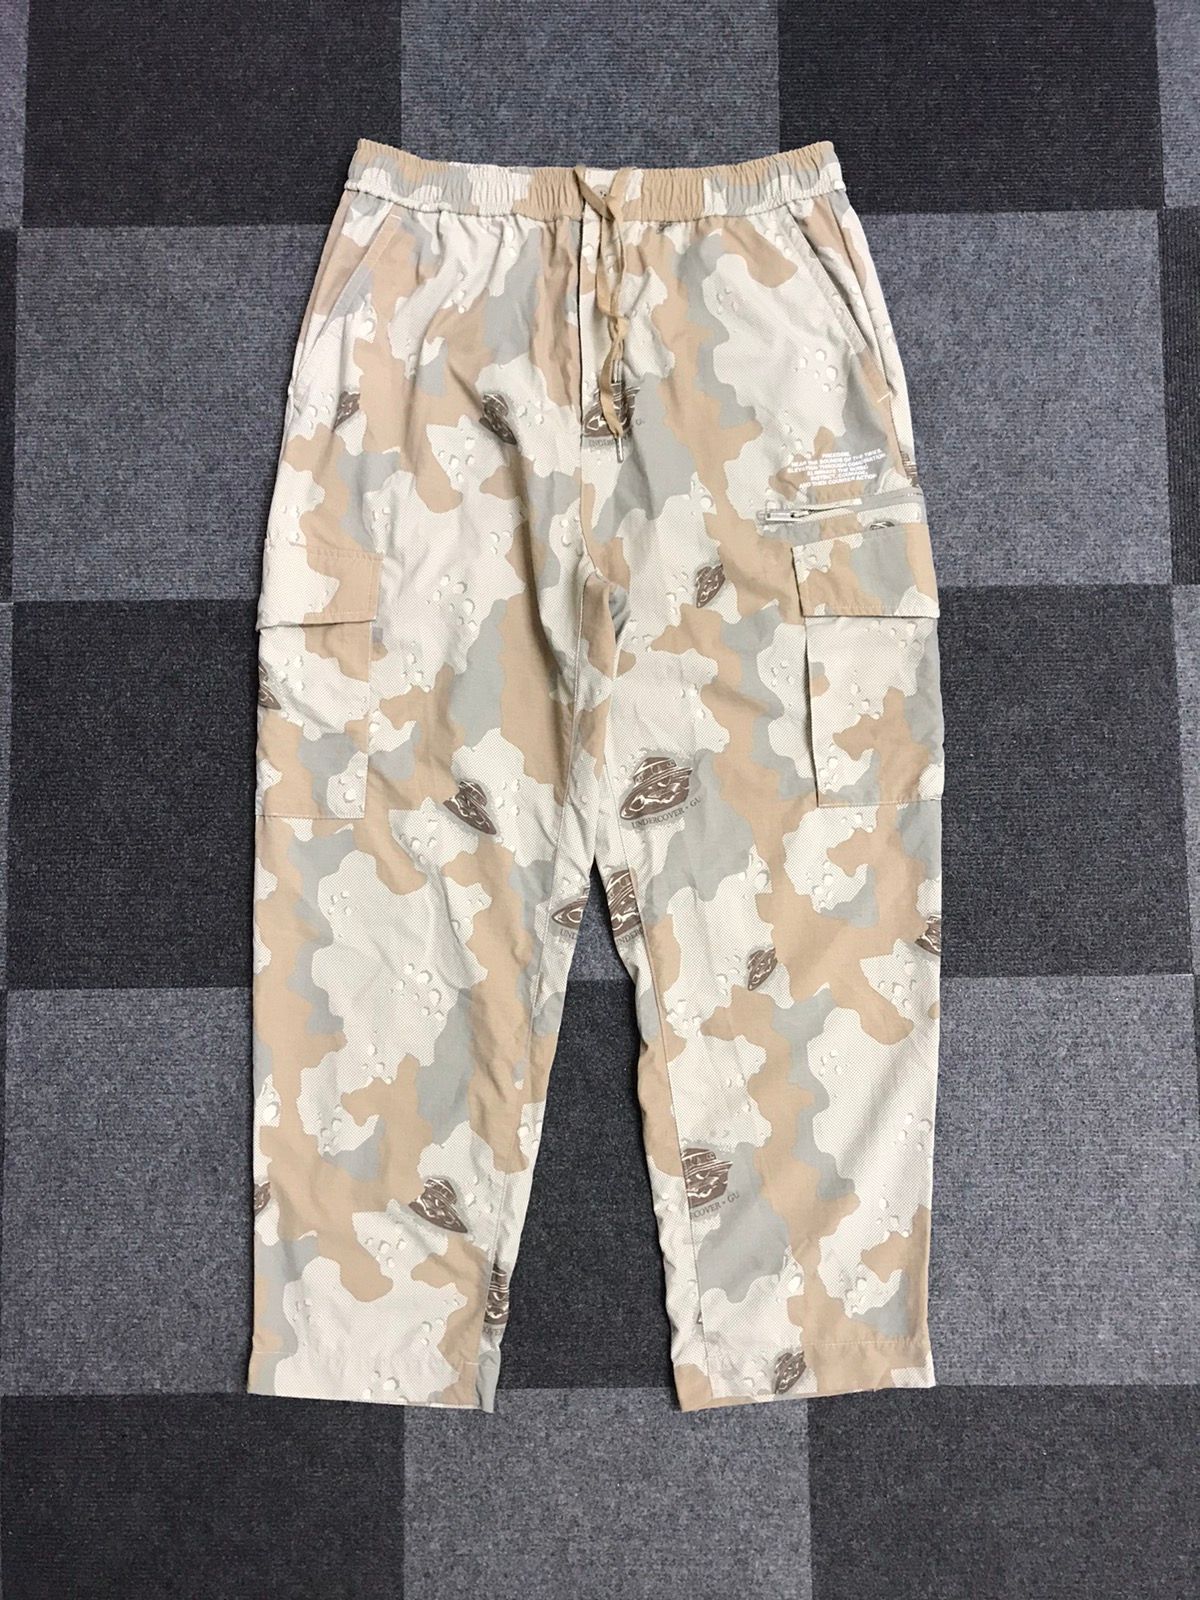 UNDERCOVER X GU Hype Beast Style Camo Multipockets Pant - 1